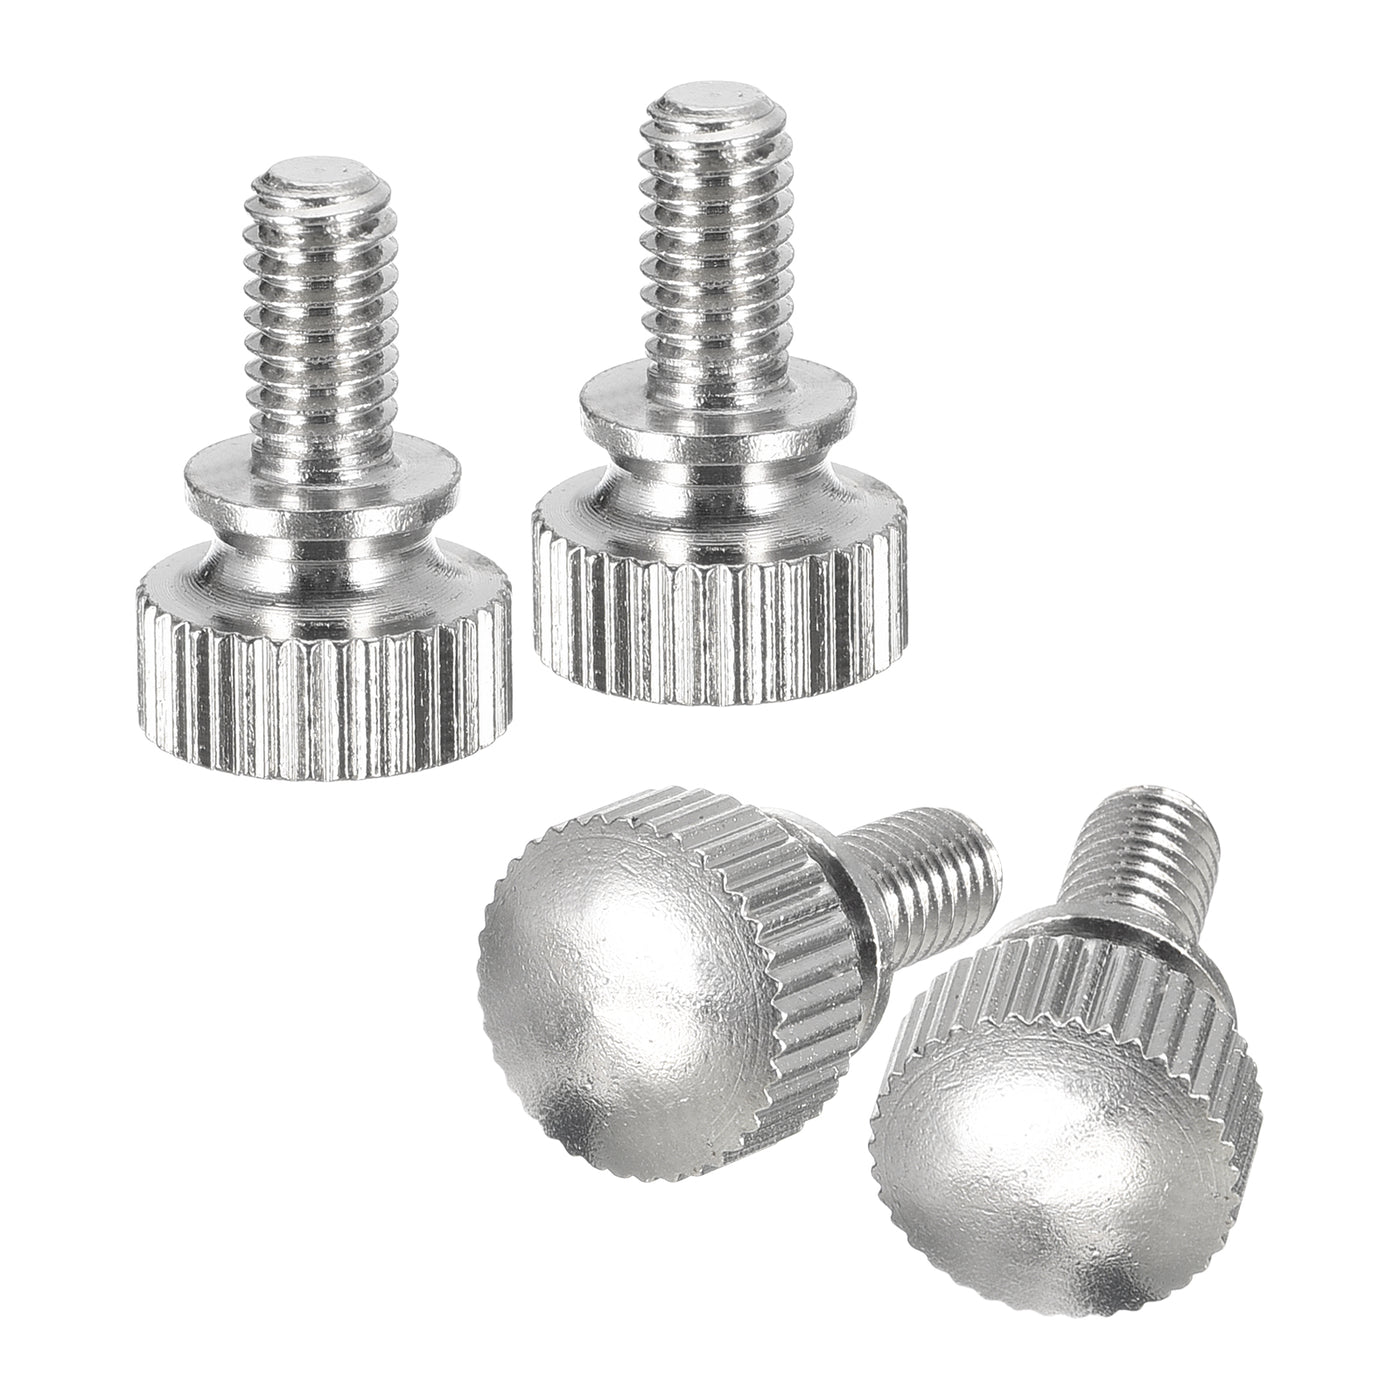 uxcell Uxcell M4x8mm Knurled Thumb Screws, 4pcs Brass Thumb Screws with Shoulder, Silver Tone